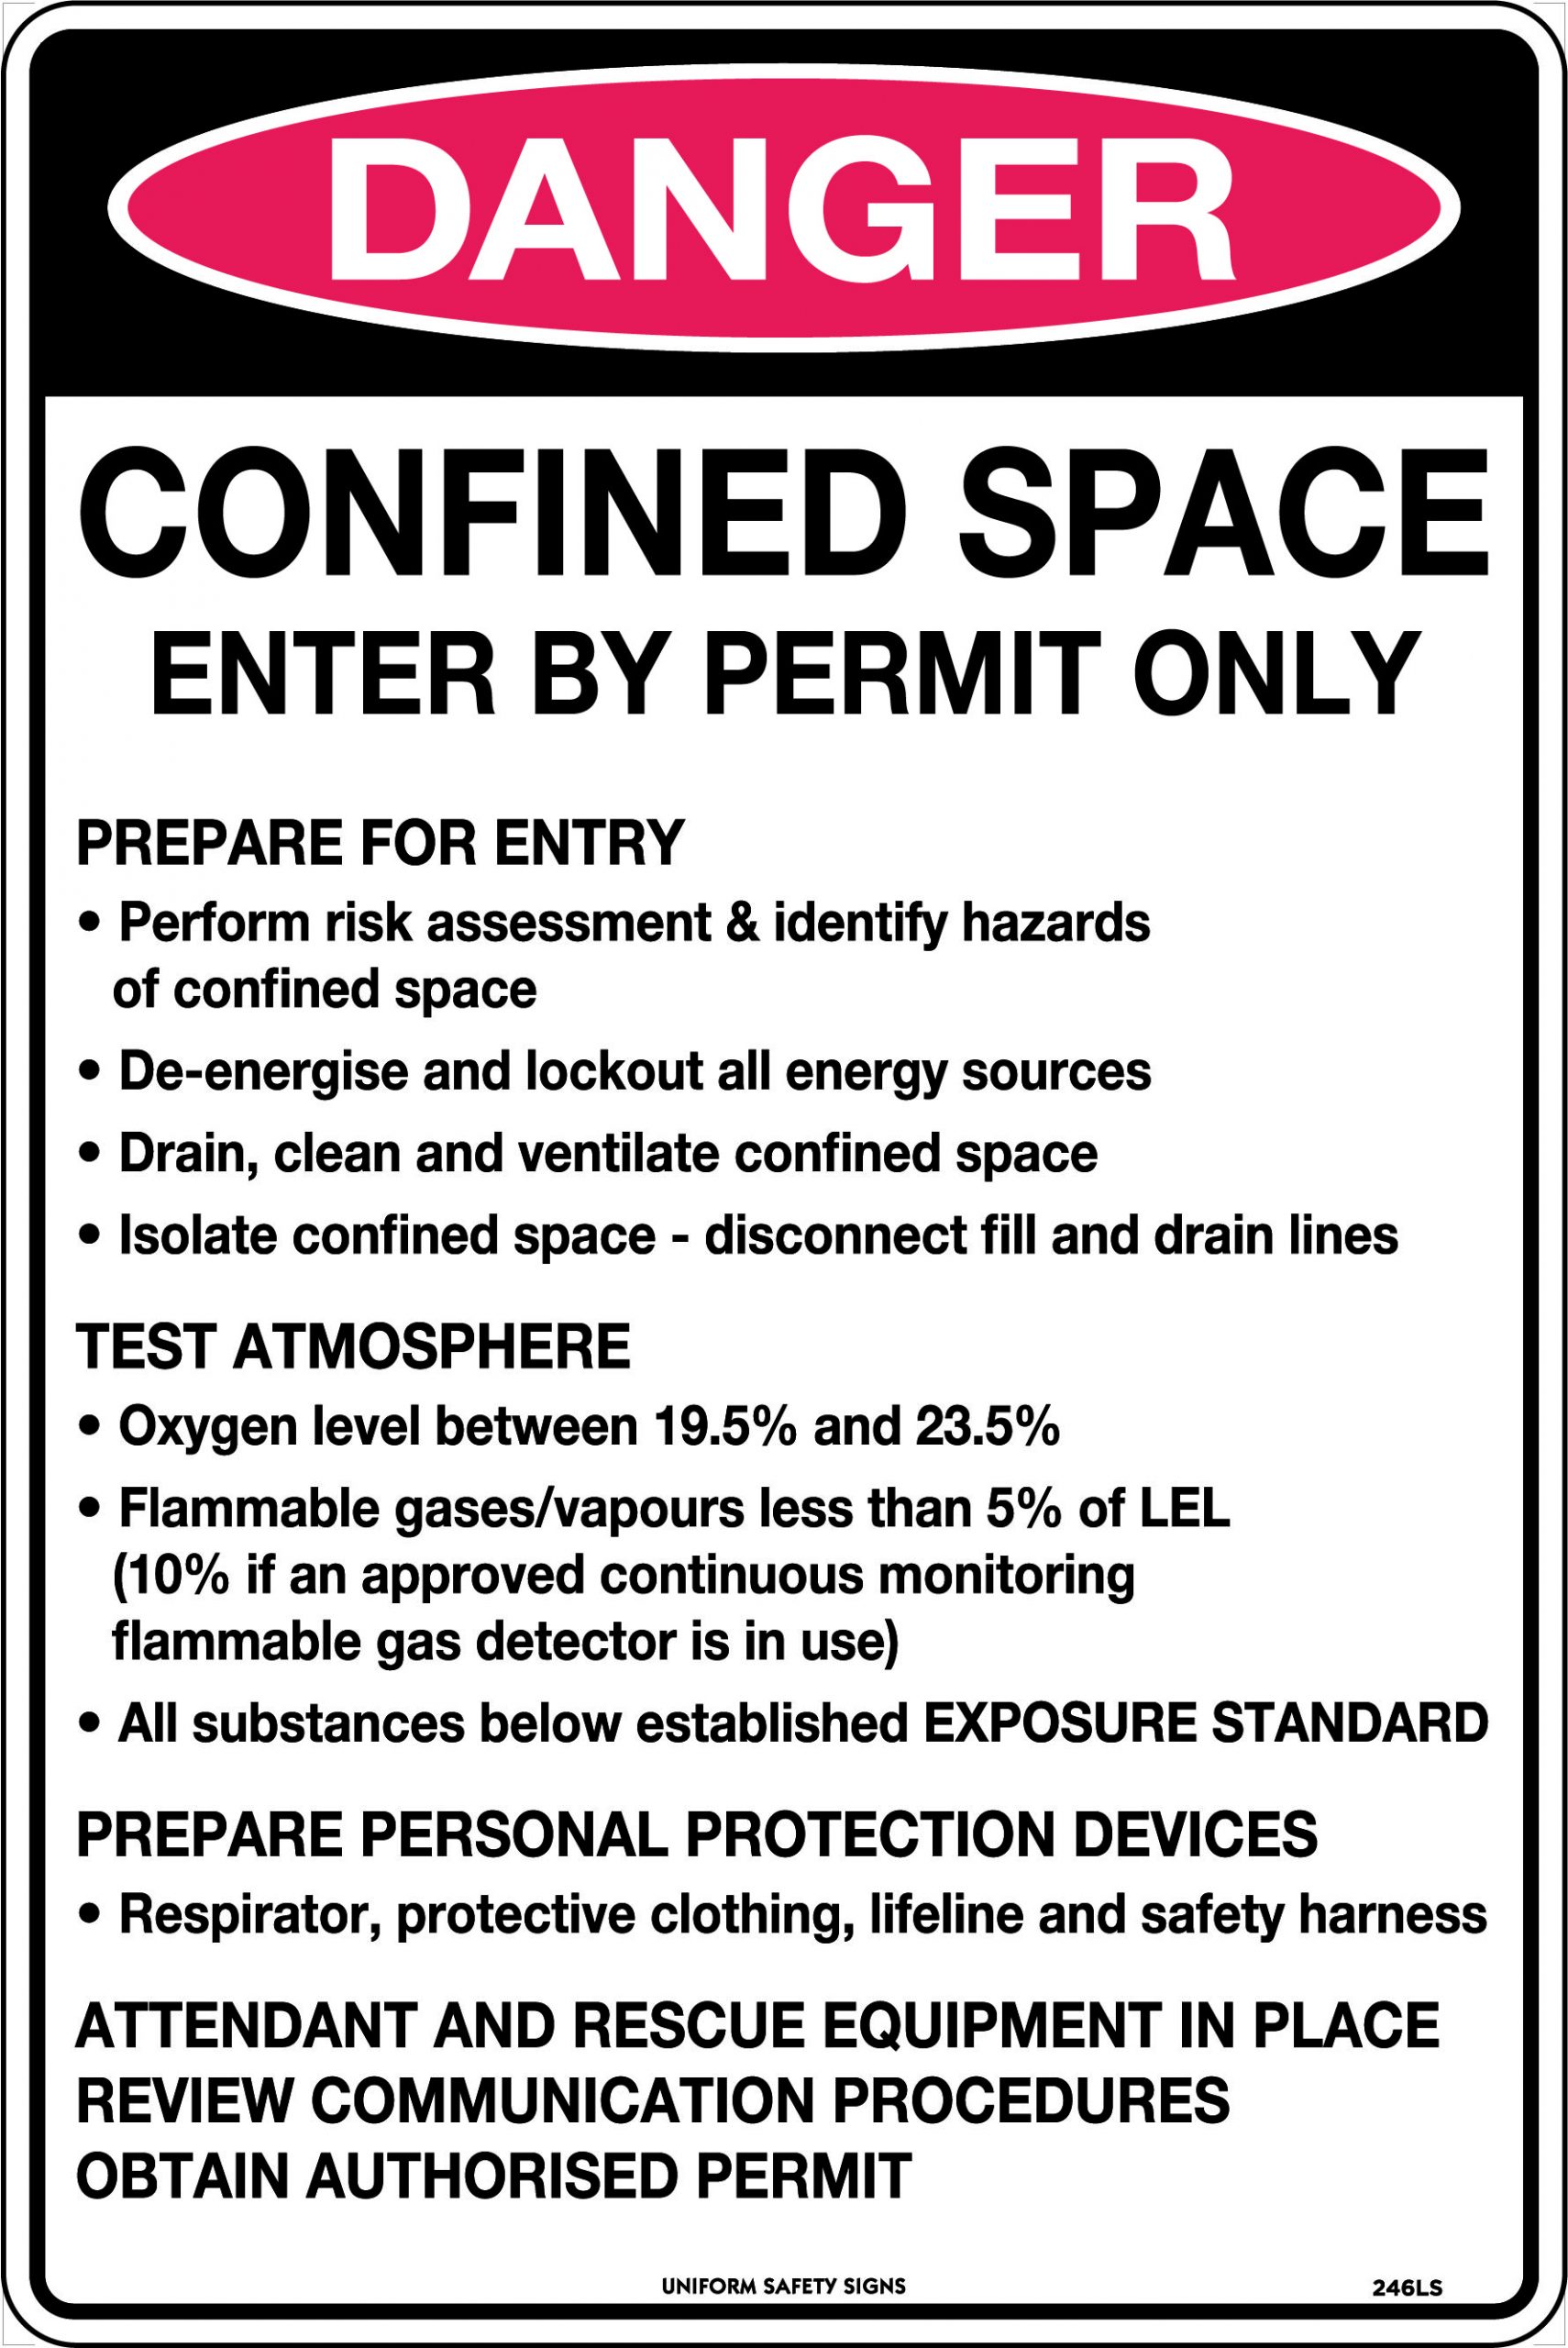 Confined Space Enter By Permit Only Prepare For Entry Sign